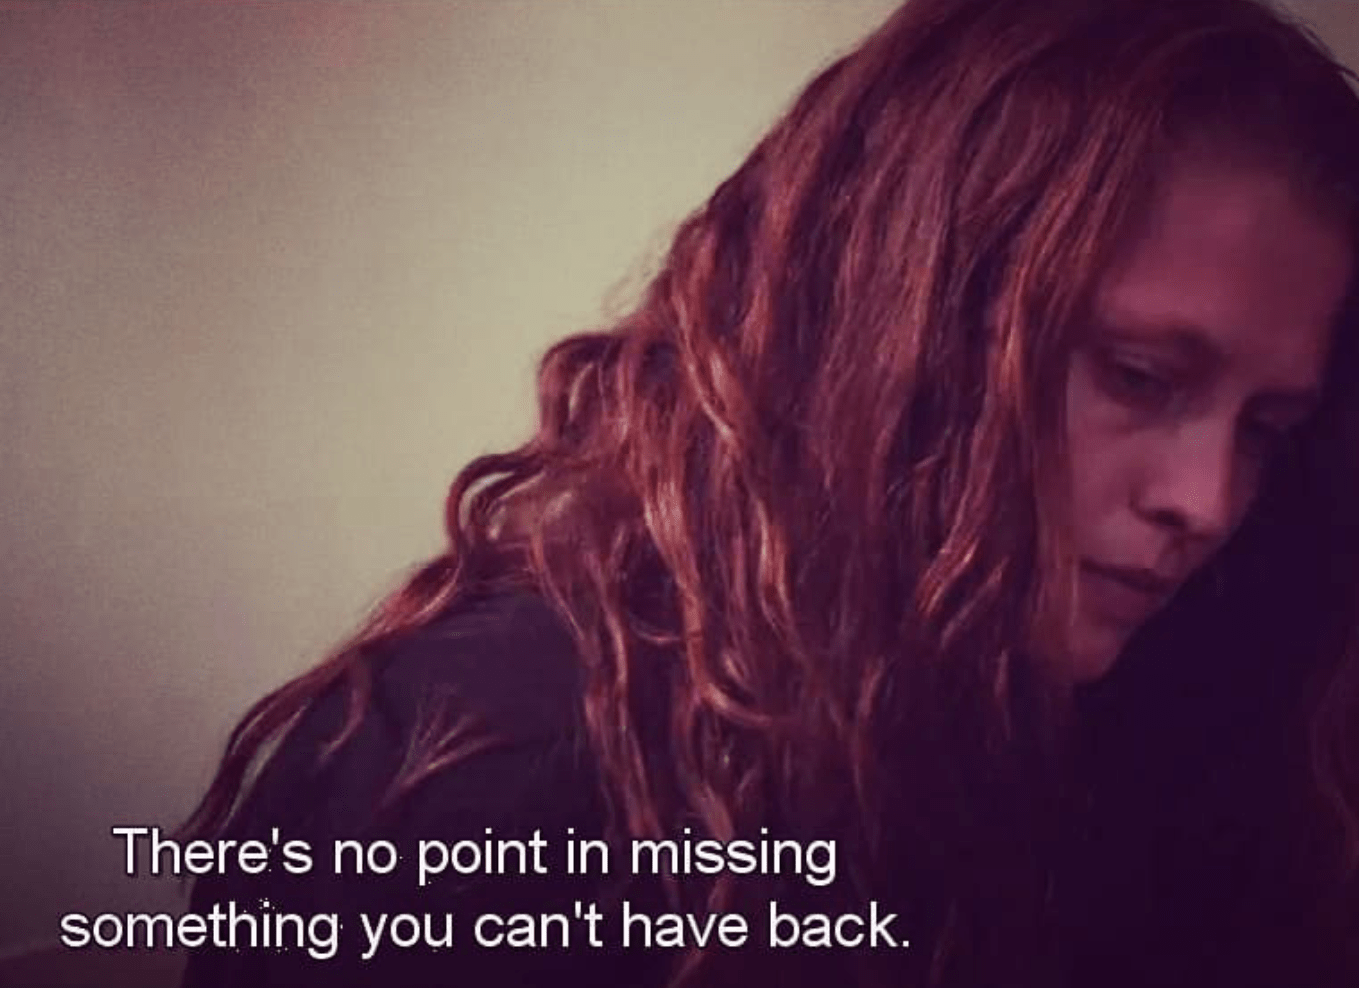 Berlin Syndrome (2017) Movie Lines